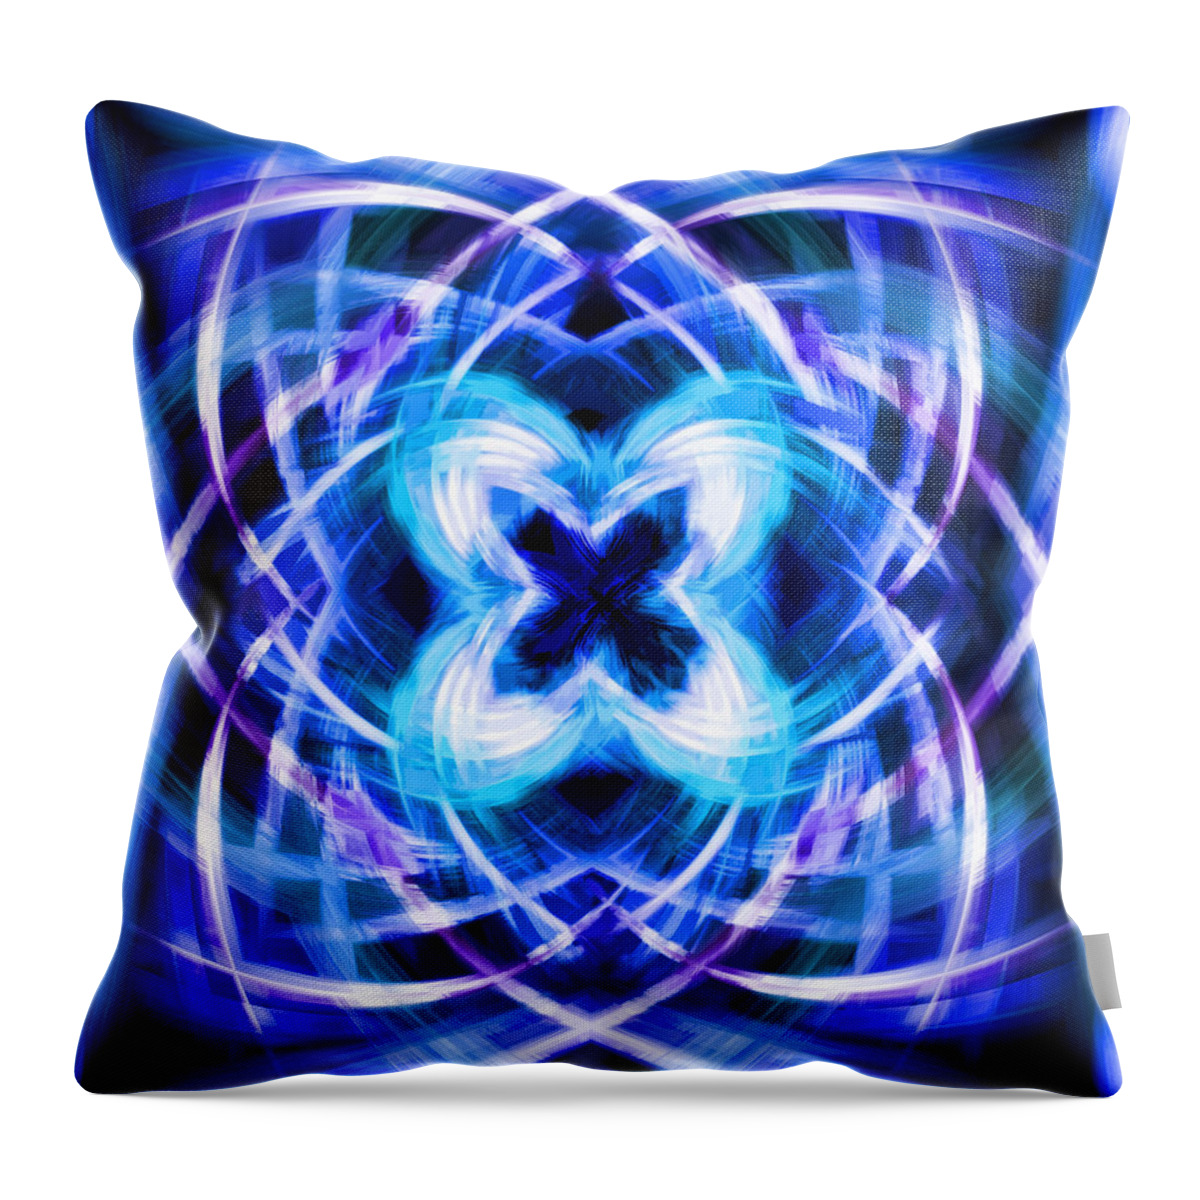 Blue Throw Pillow featuring the photograph Blue Butterfly by Cherie Duran